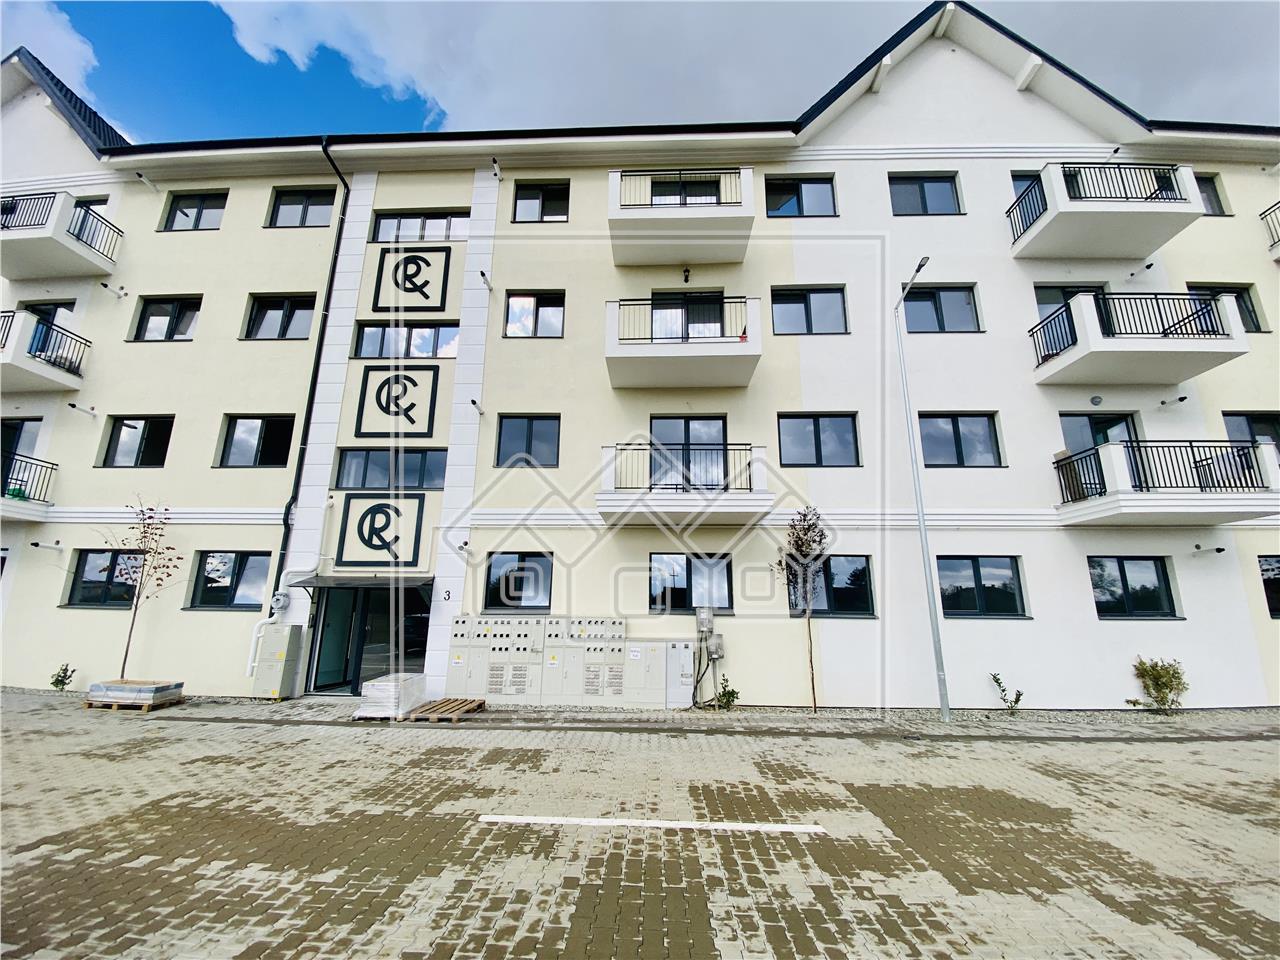 Studio for sale in Sibiu - detached - tabulated - speaker and parking